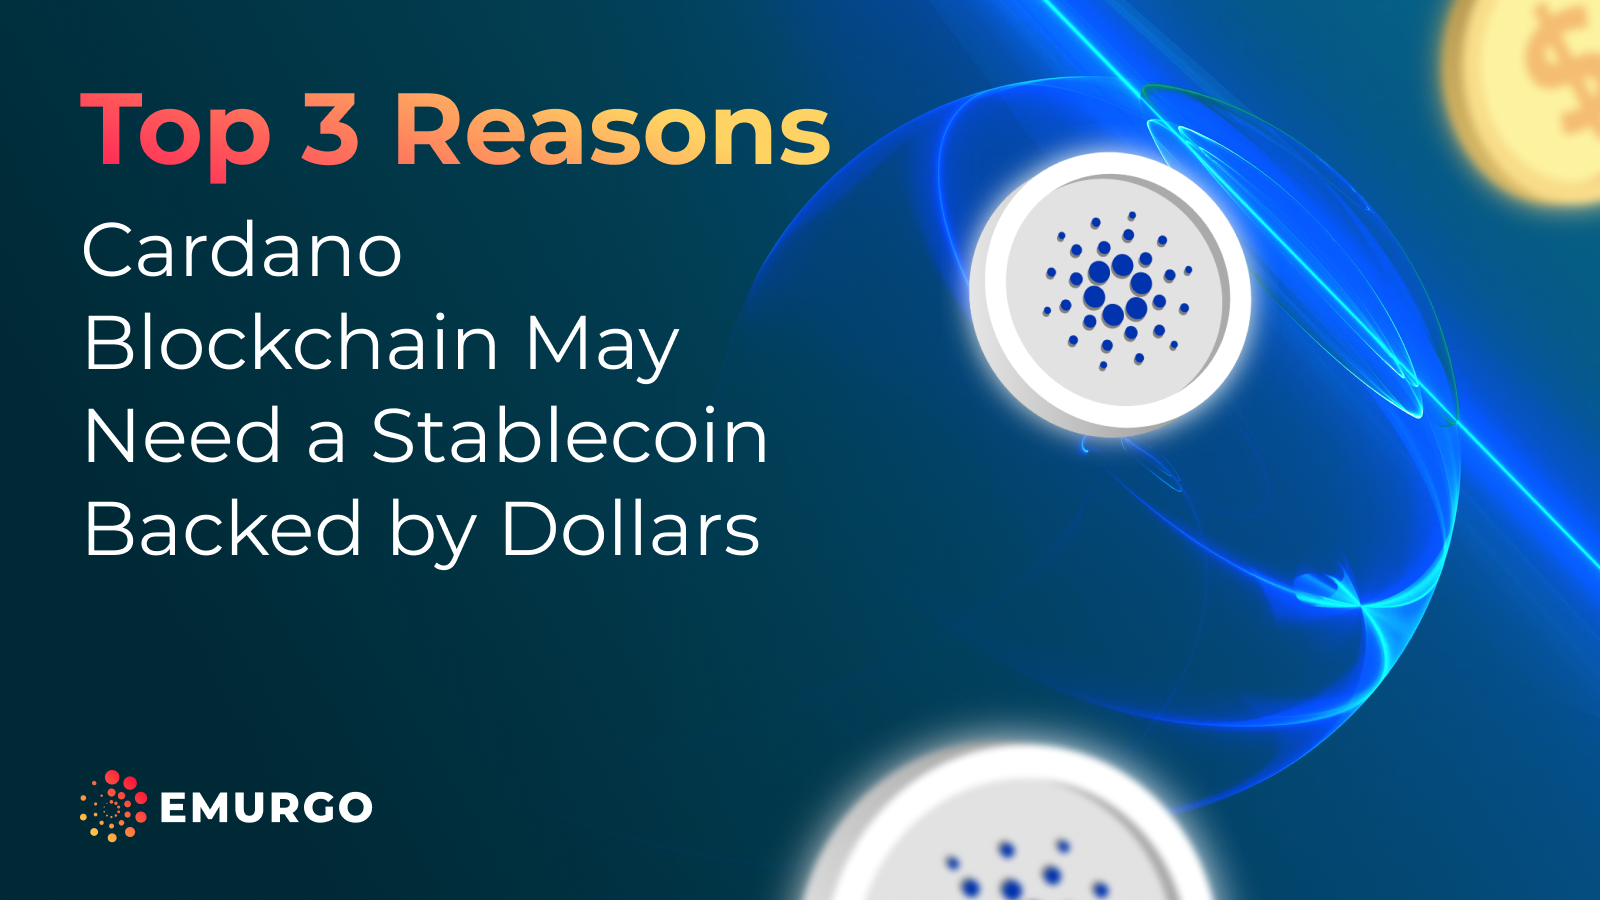 Why-Cardano-Blockchain-Needs-Stablecoin-Fiat-Dollars.png